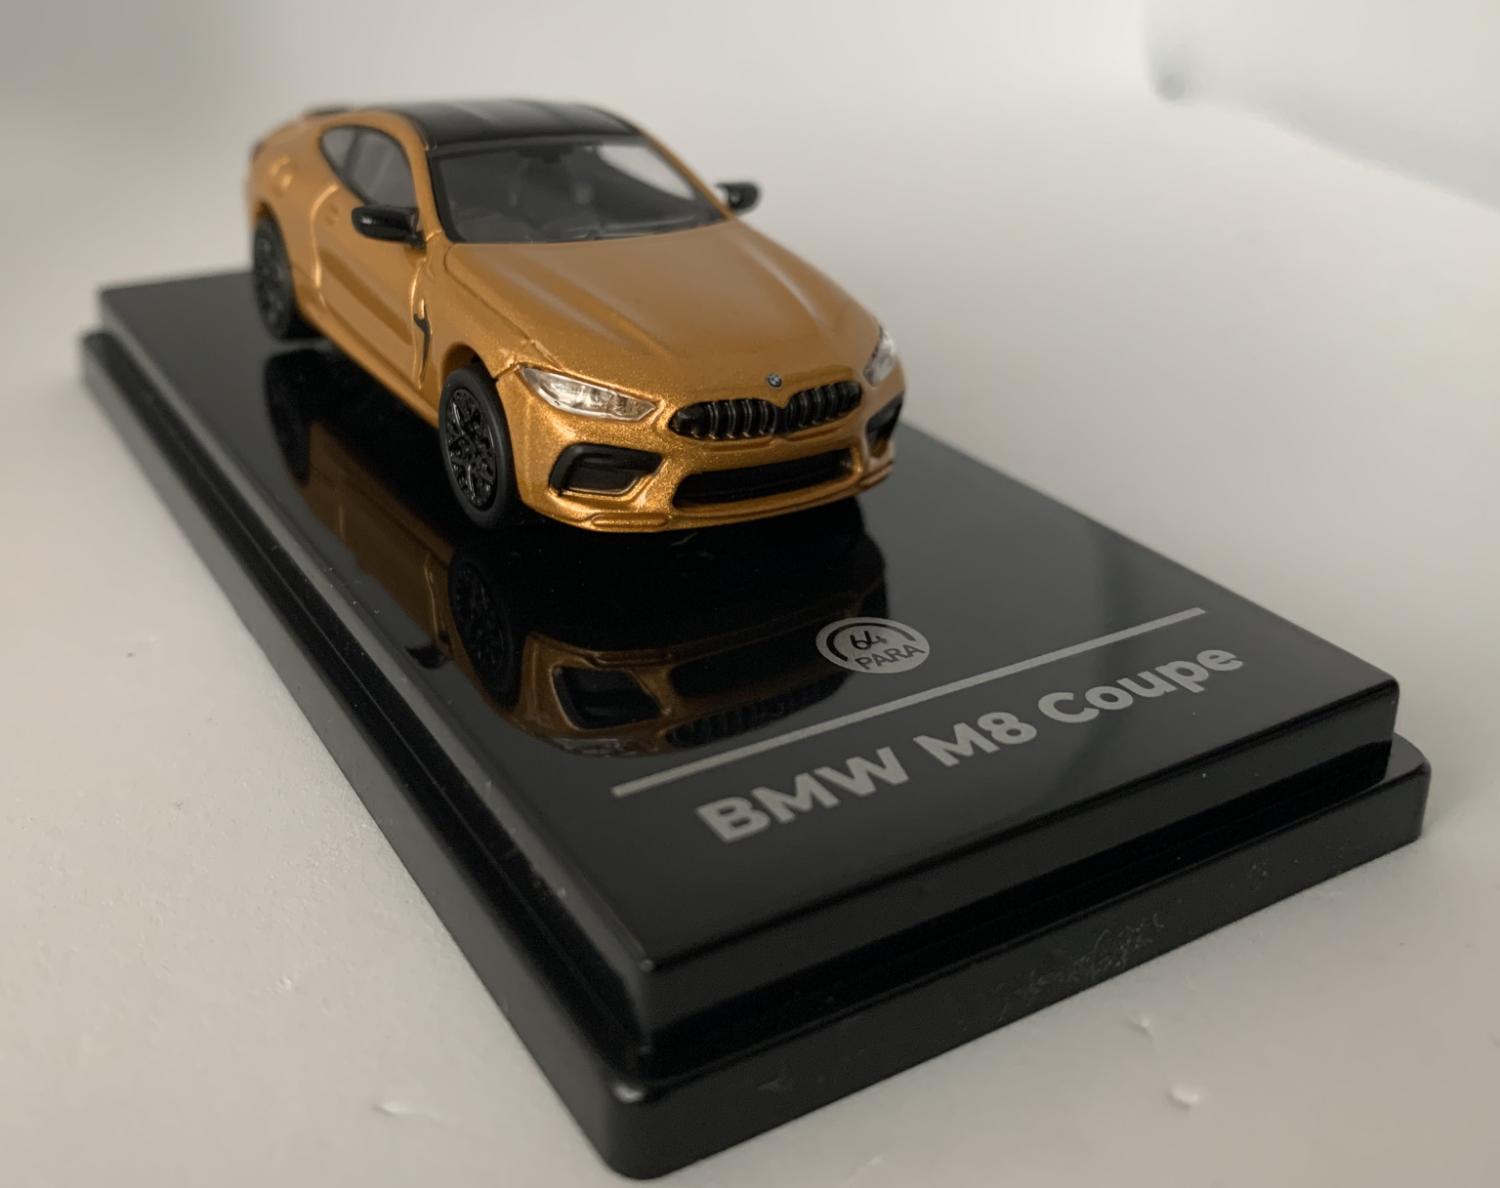 An excellent scale model of a BMW M8 Coupe decorated in ceylon gold